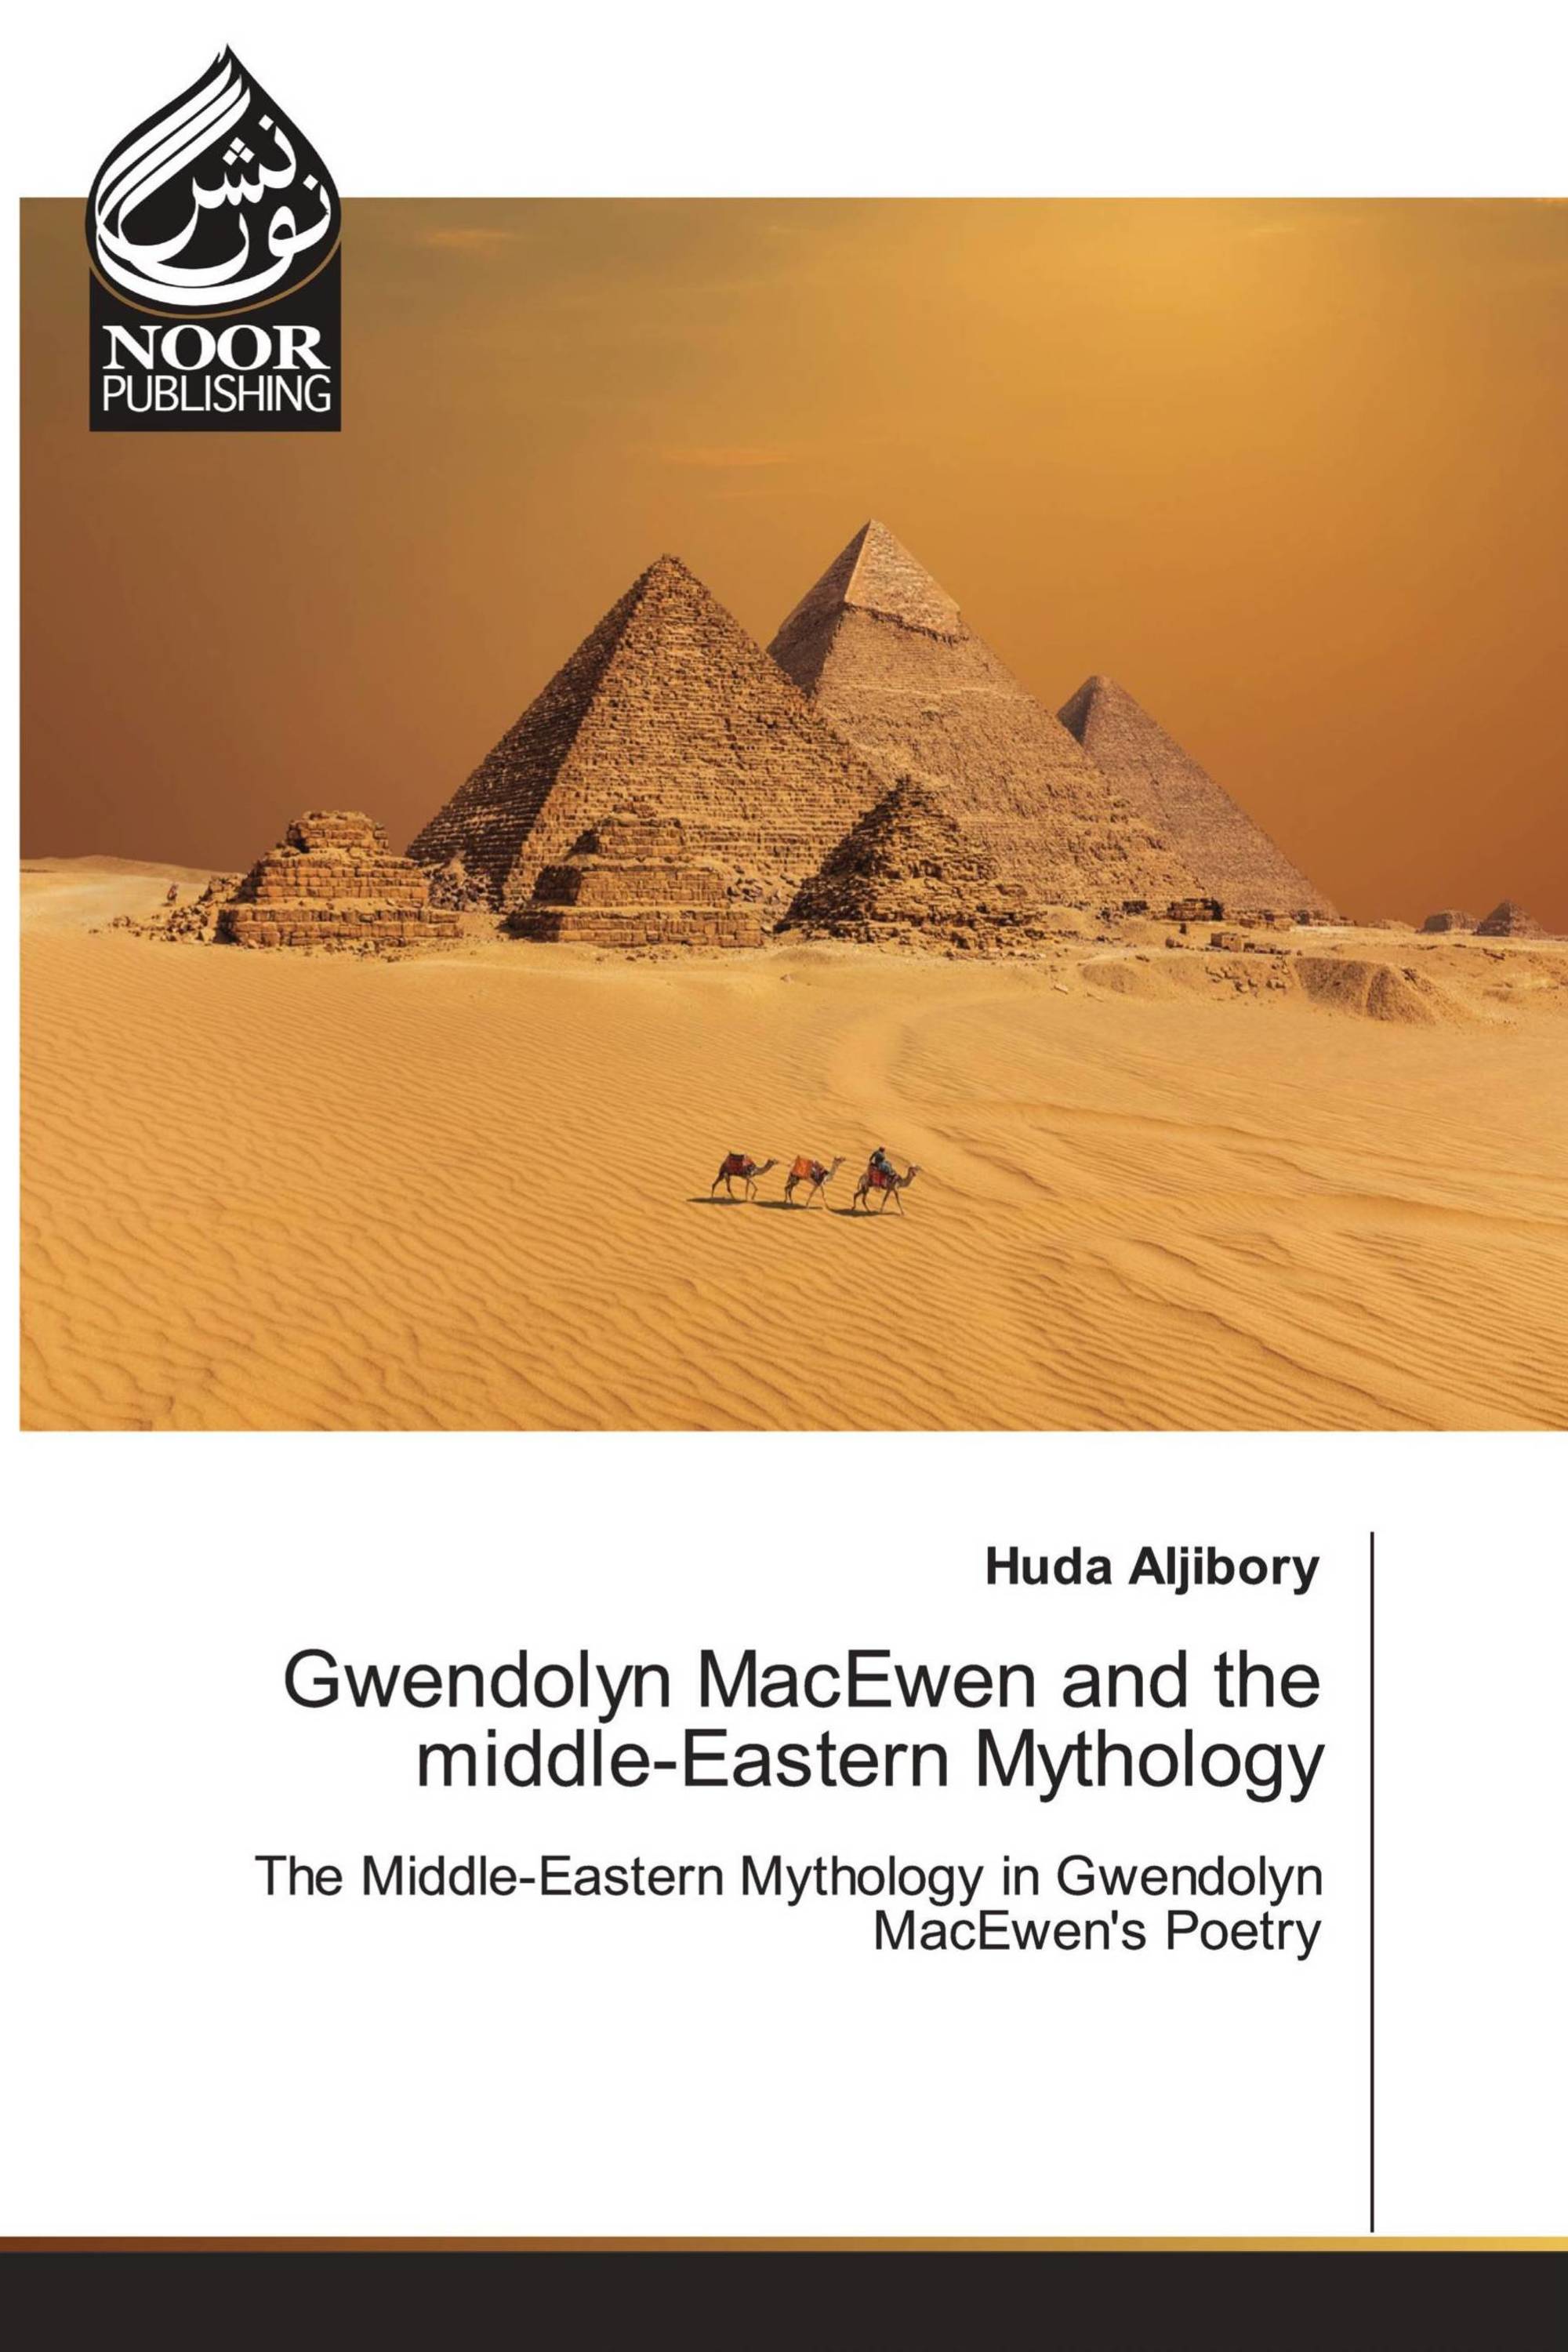 Gwendolyn MacEwen and the middle-Eastern Mythology